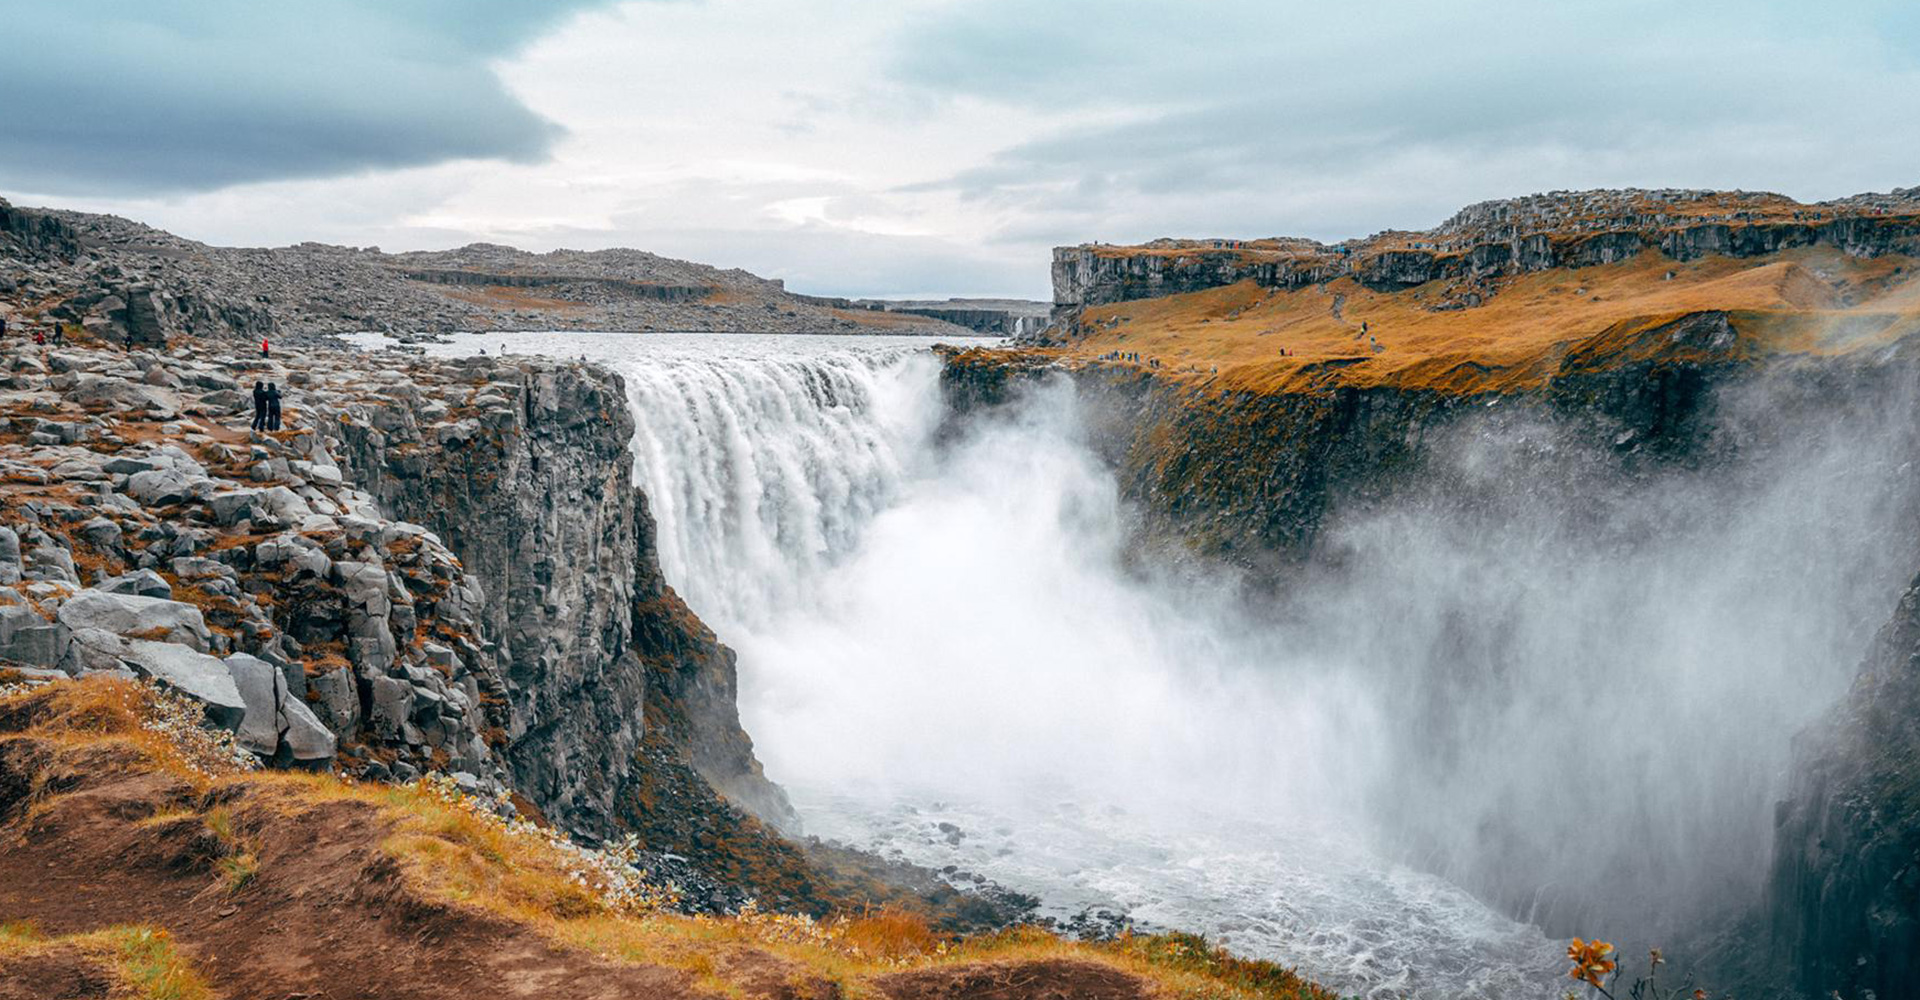 The mighty Dettifoss is one of the most powerful waterfalls on Earth.